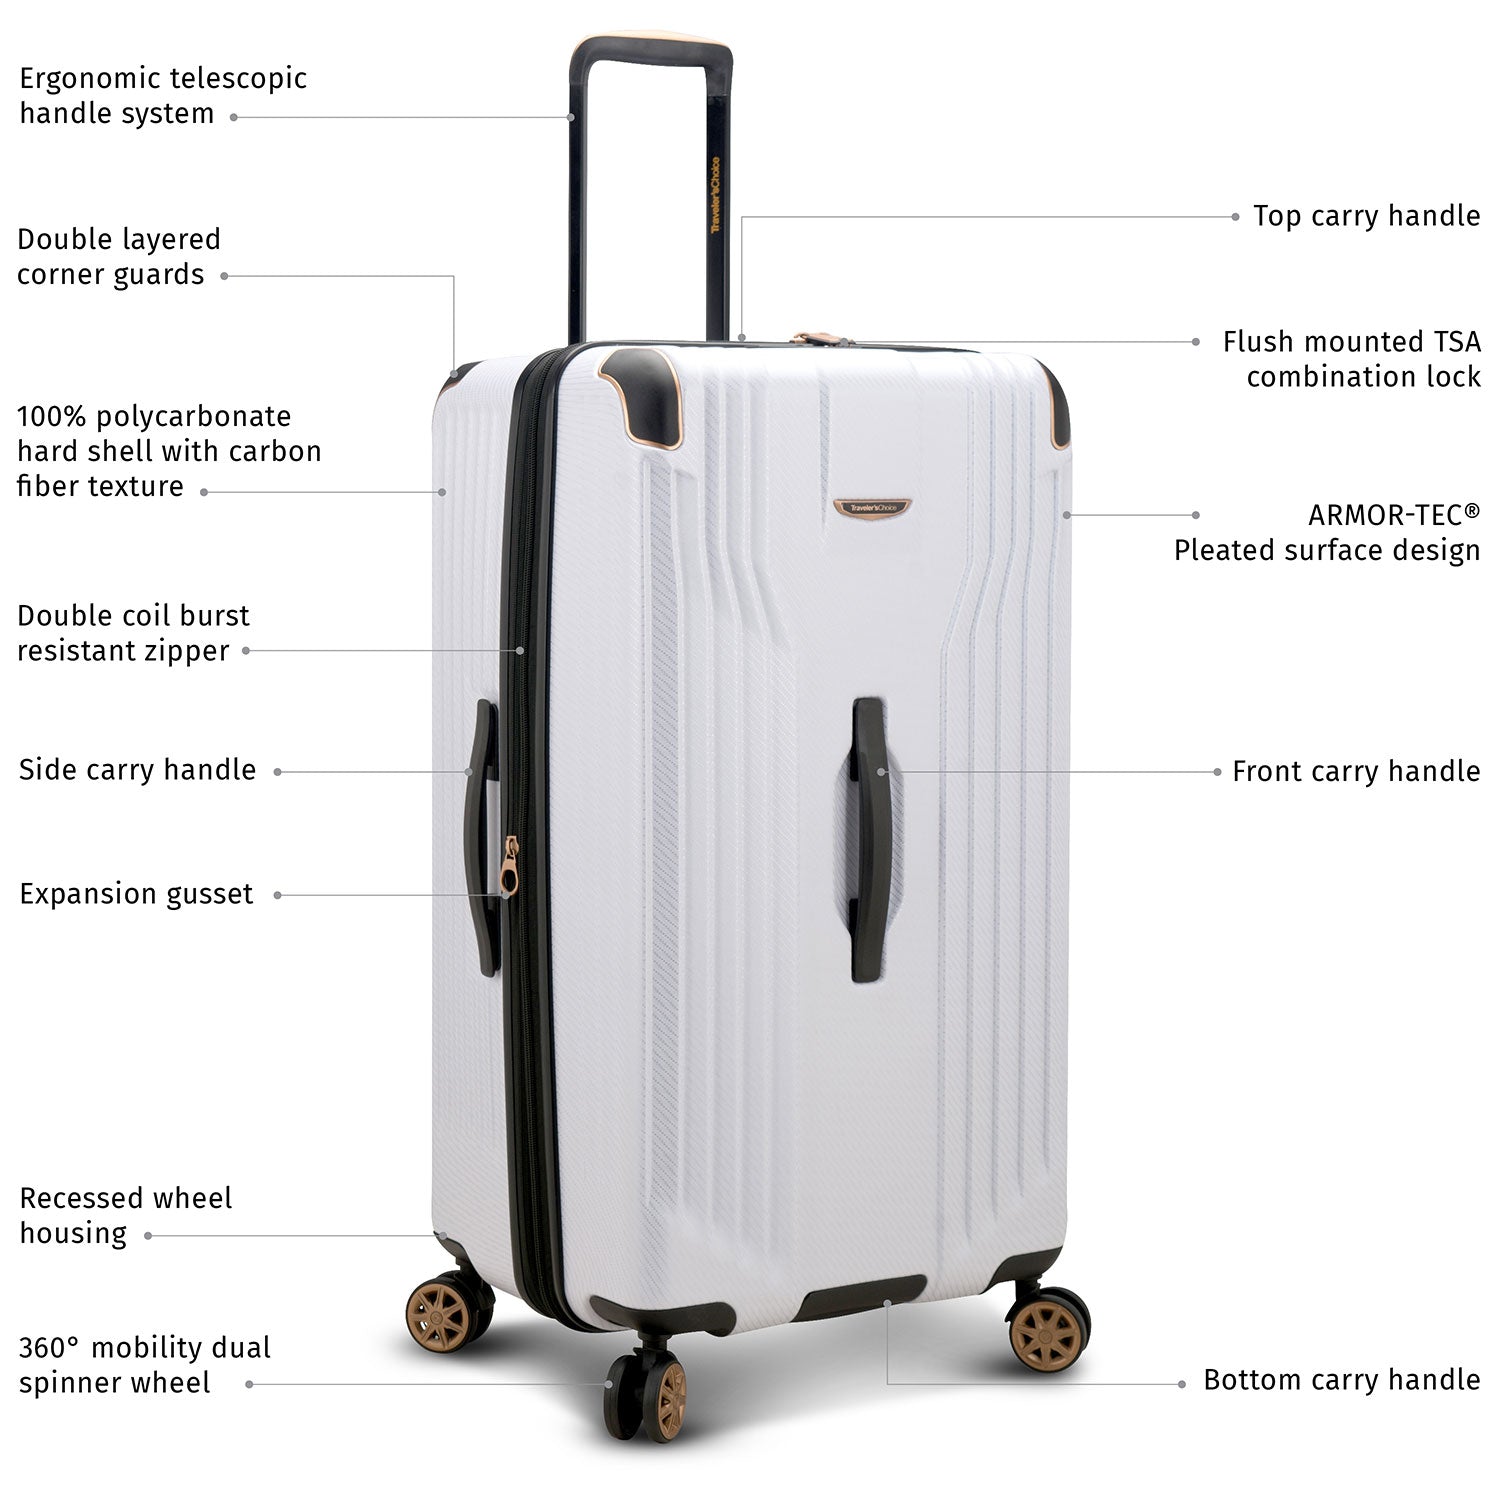 Continent Adventurer Large Trunk Luggage with 4 Spinner Wheels